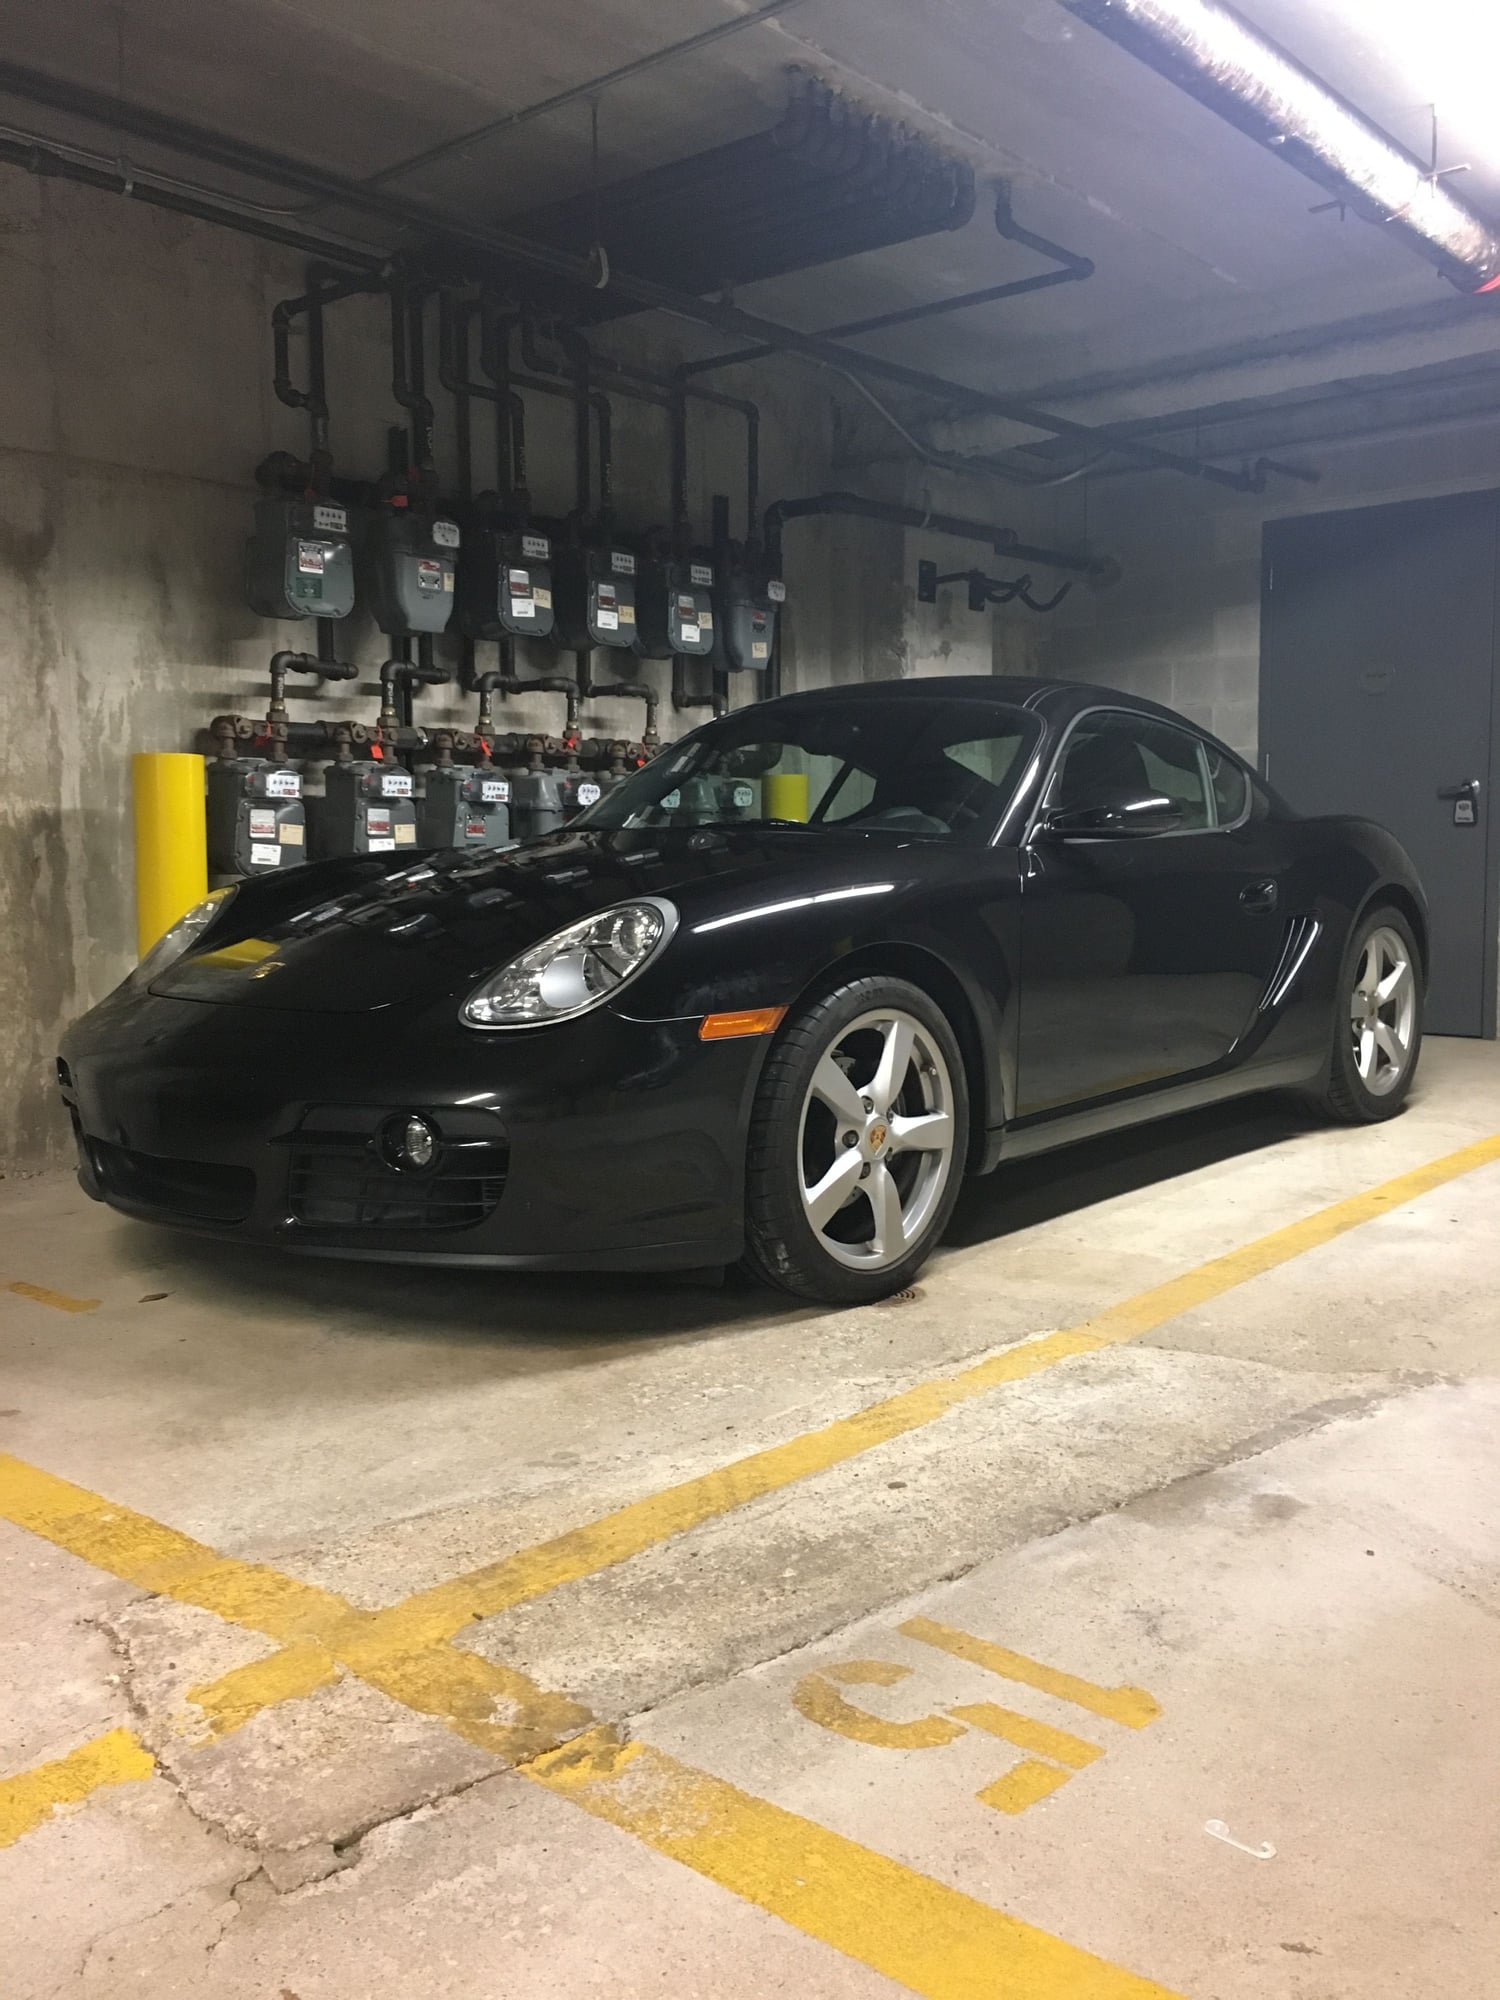 2007 Porsche Cayman - 2007 Cayman 31k miles, tiptronic, major maintenance done - Used - VIN WPOAA29827U762917 - 31,000 Miles - 6 cyl - 2WD - Automatic - Coupe - Black - Chiacago, IL 60654, United States